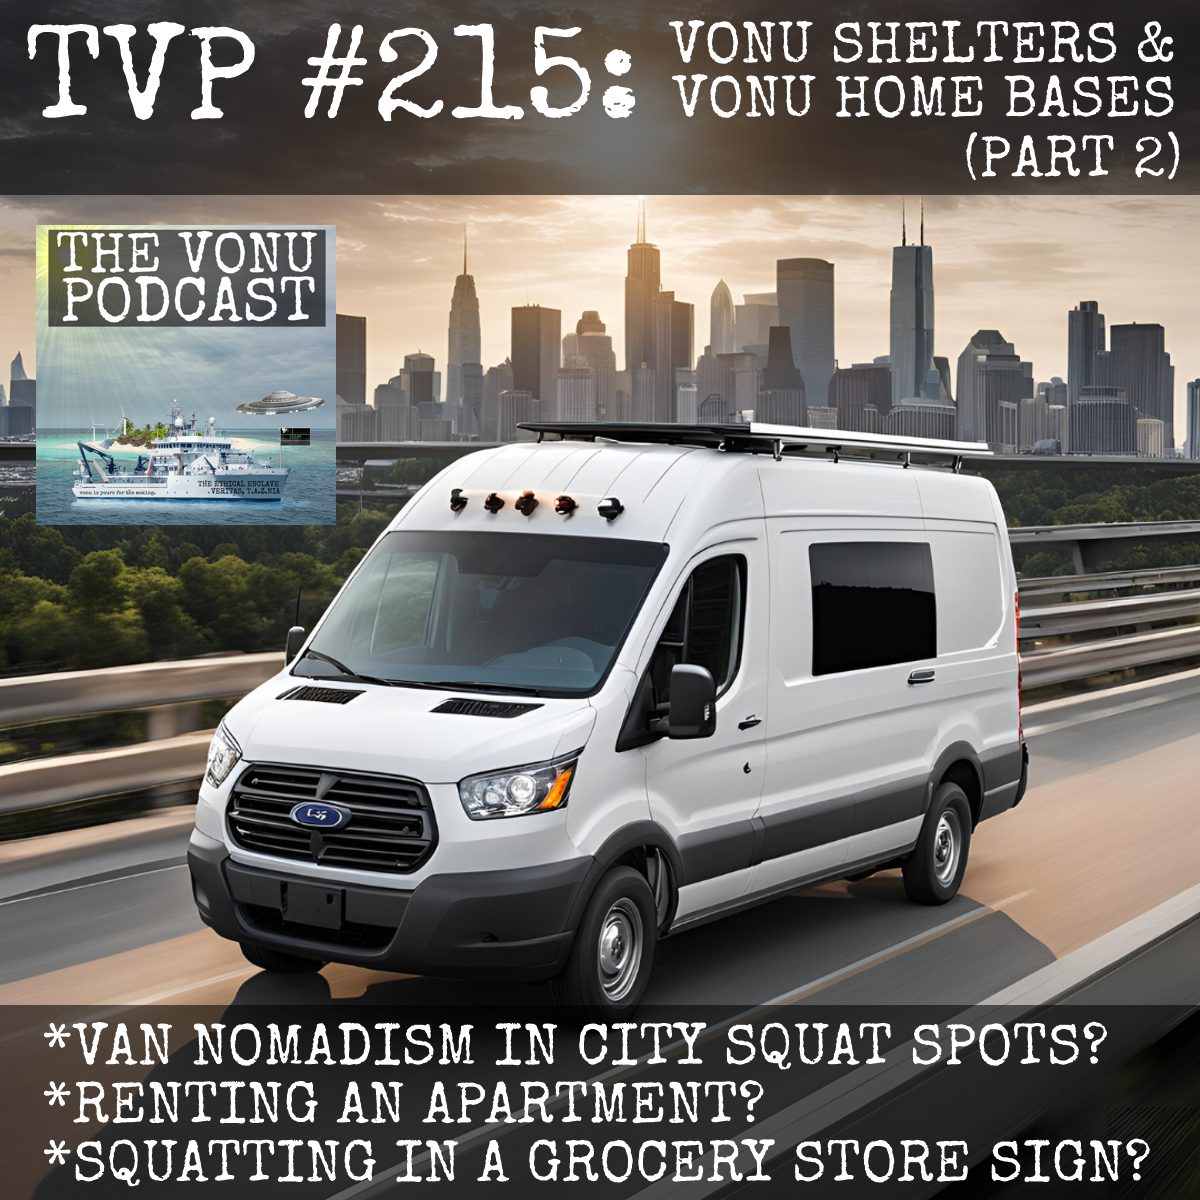 TVP #215: Vonu Shelters & Vonu Home Bases Revisited (Part 2) with Kyle Rearden